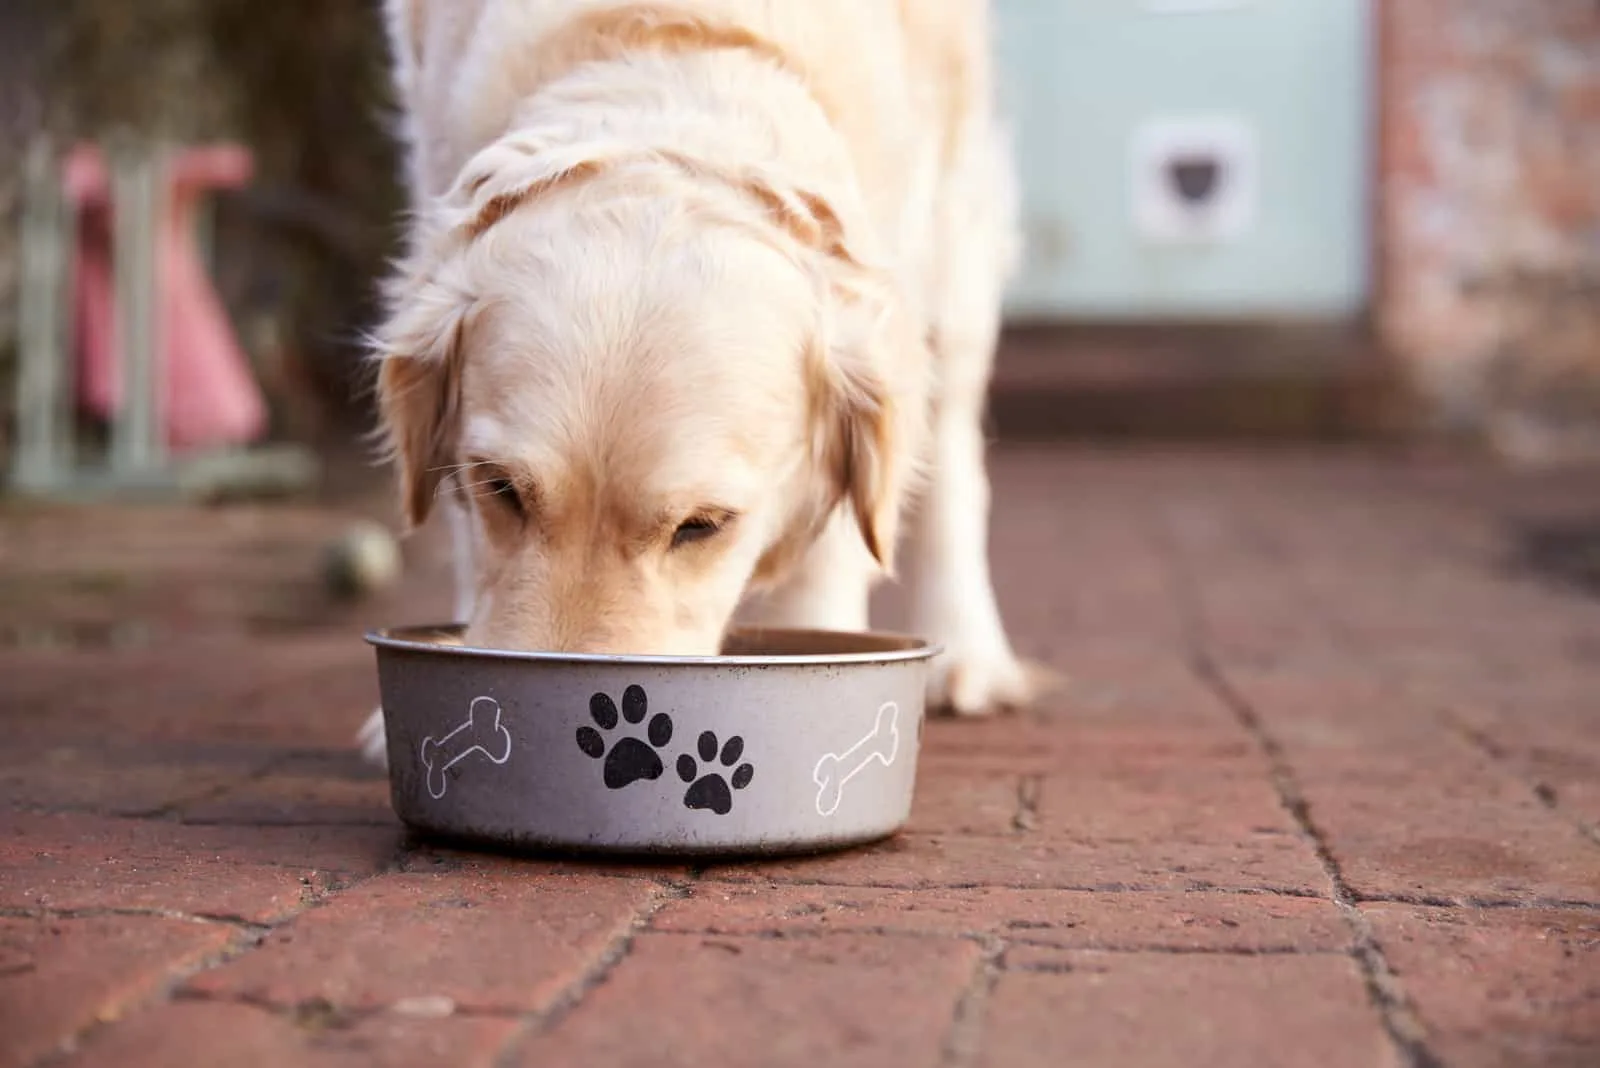 the dog eats food from his bowl